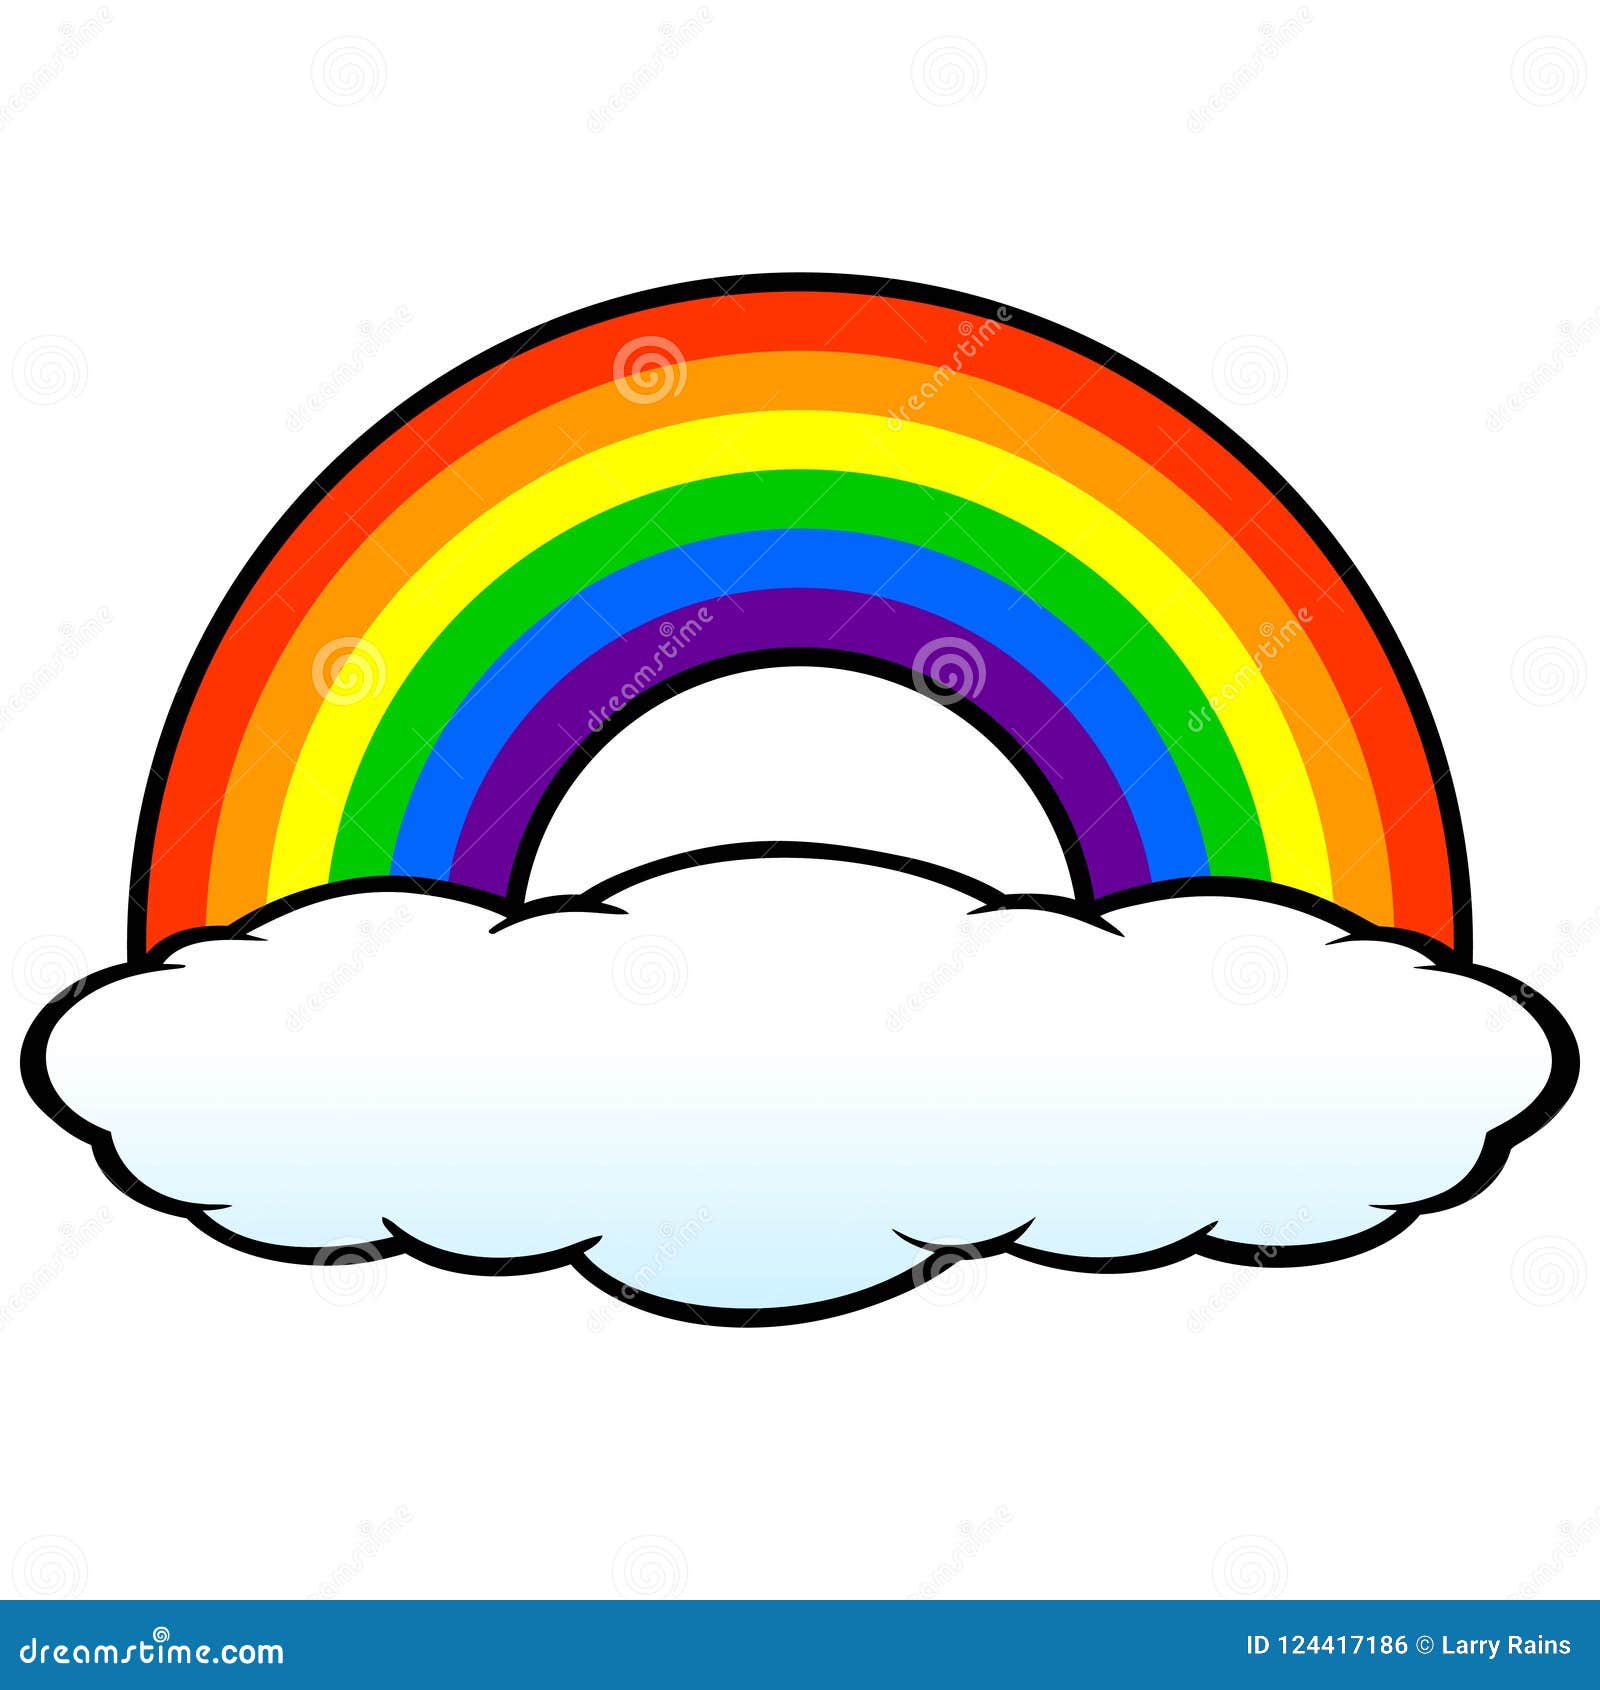 Rainbow with Cloud stock vector. Illustration of vector - 124417186